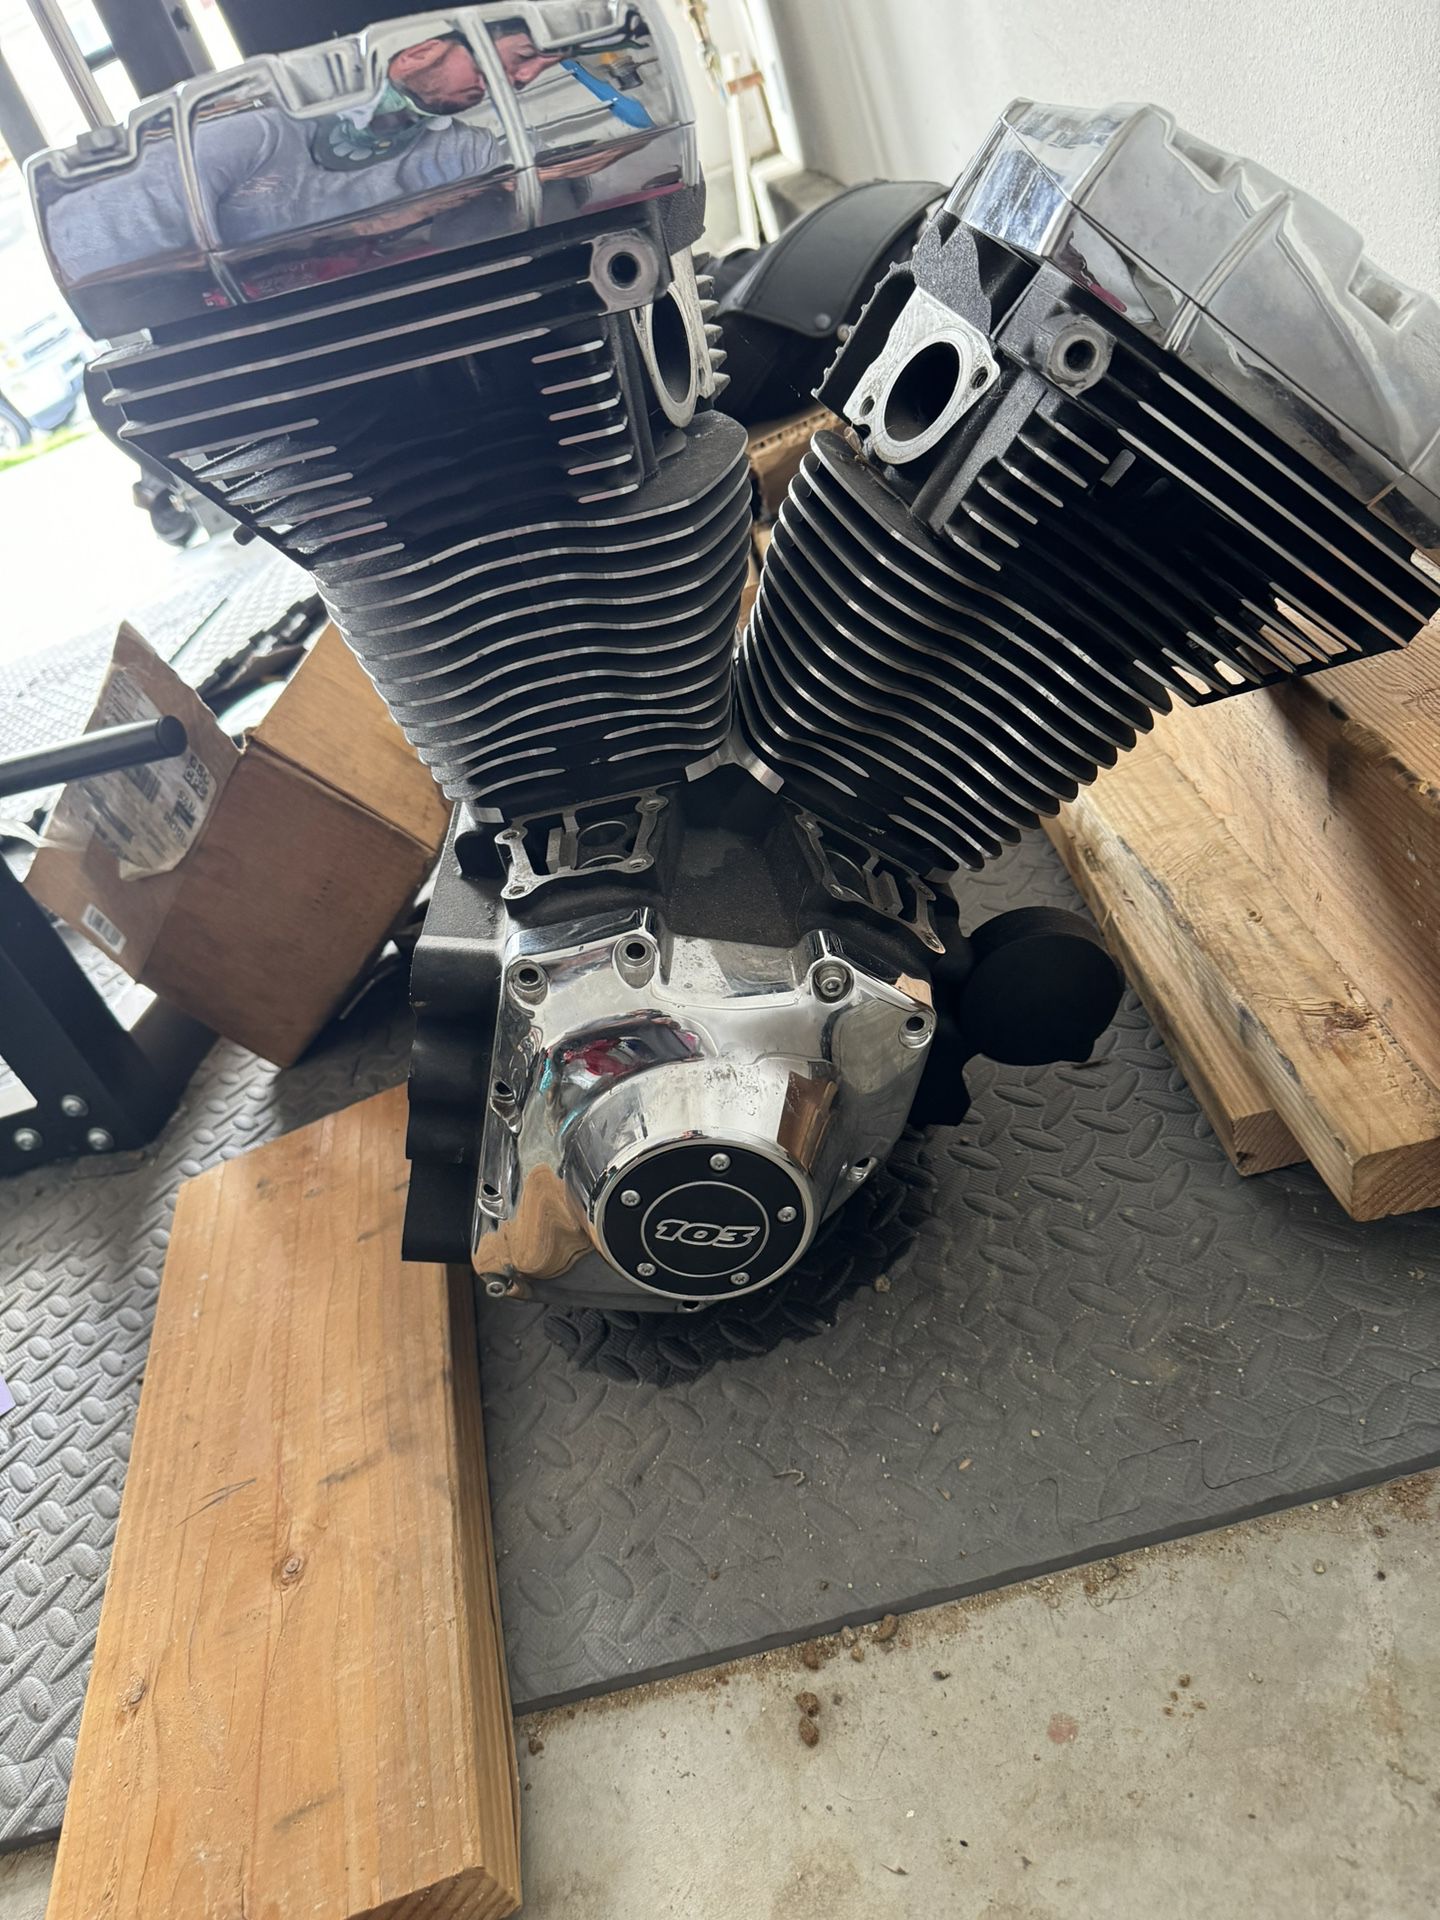 103 Twin Cam Engine W/ Papers